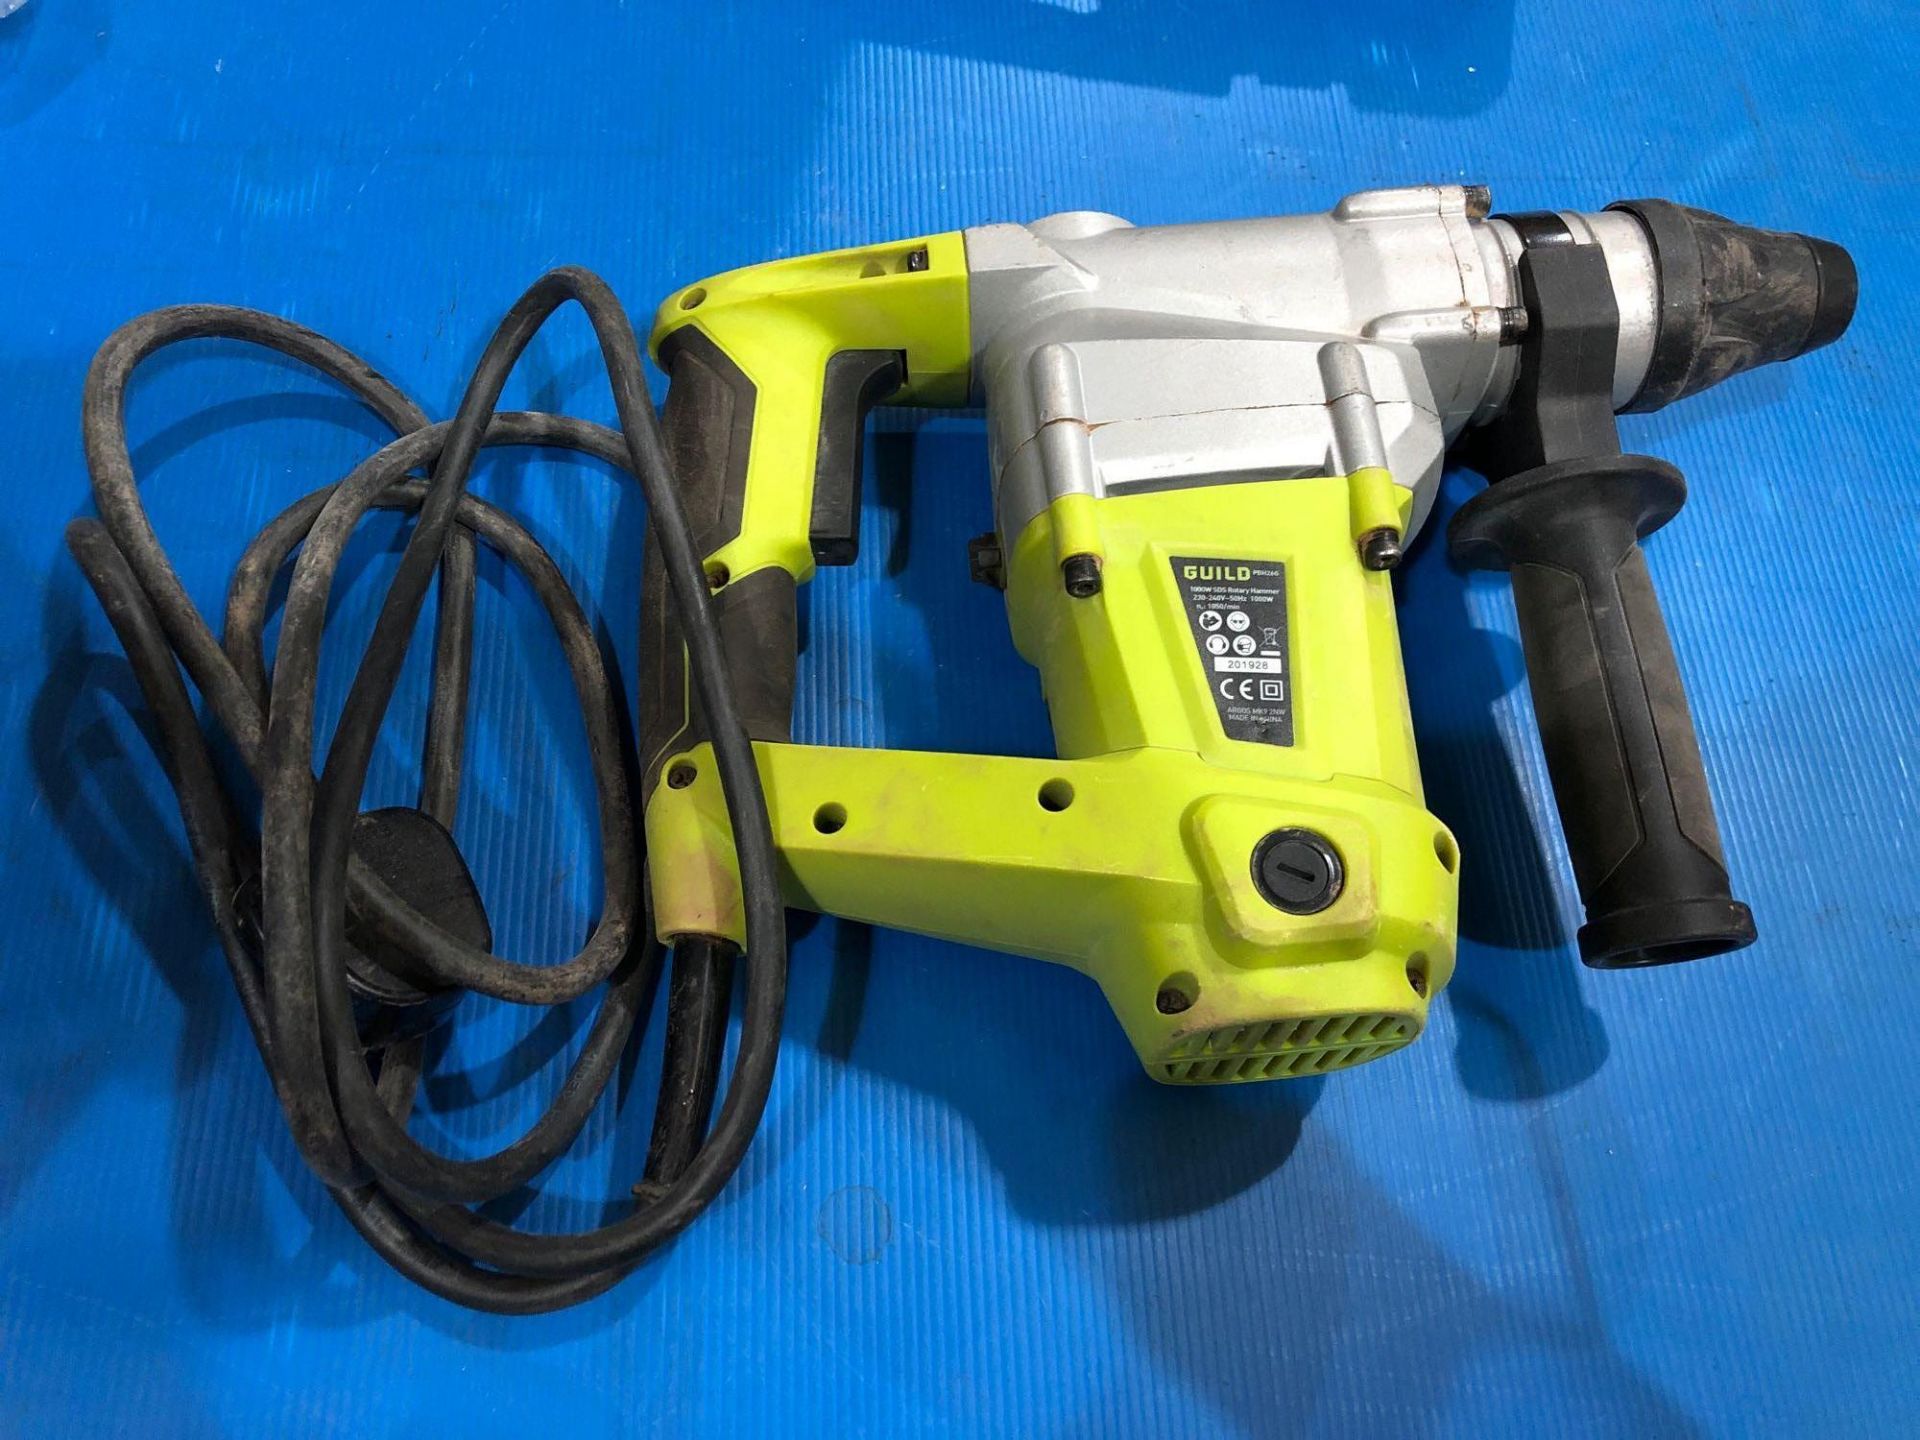 Guild Corded SDS Rotary Hammer Drill - 1000W PDH26G 453/3102 - £50.00 RRP - Image 5 of 11